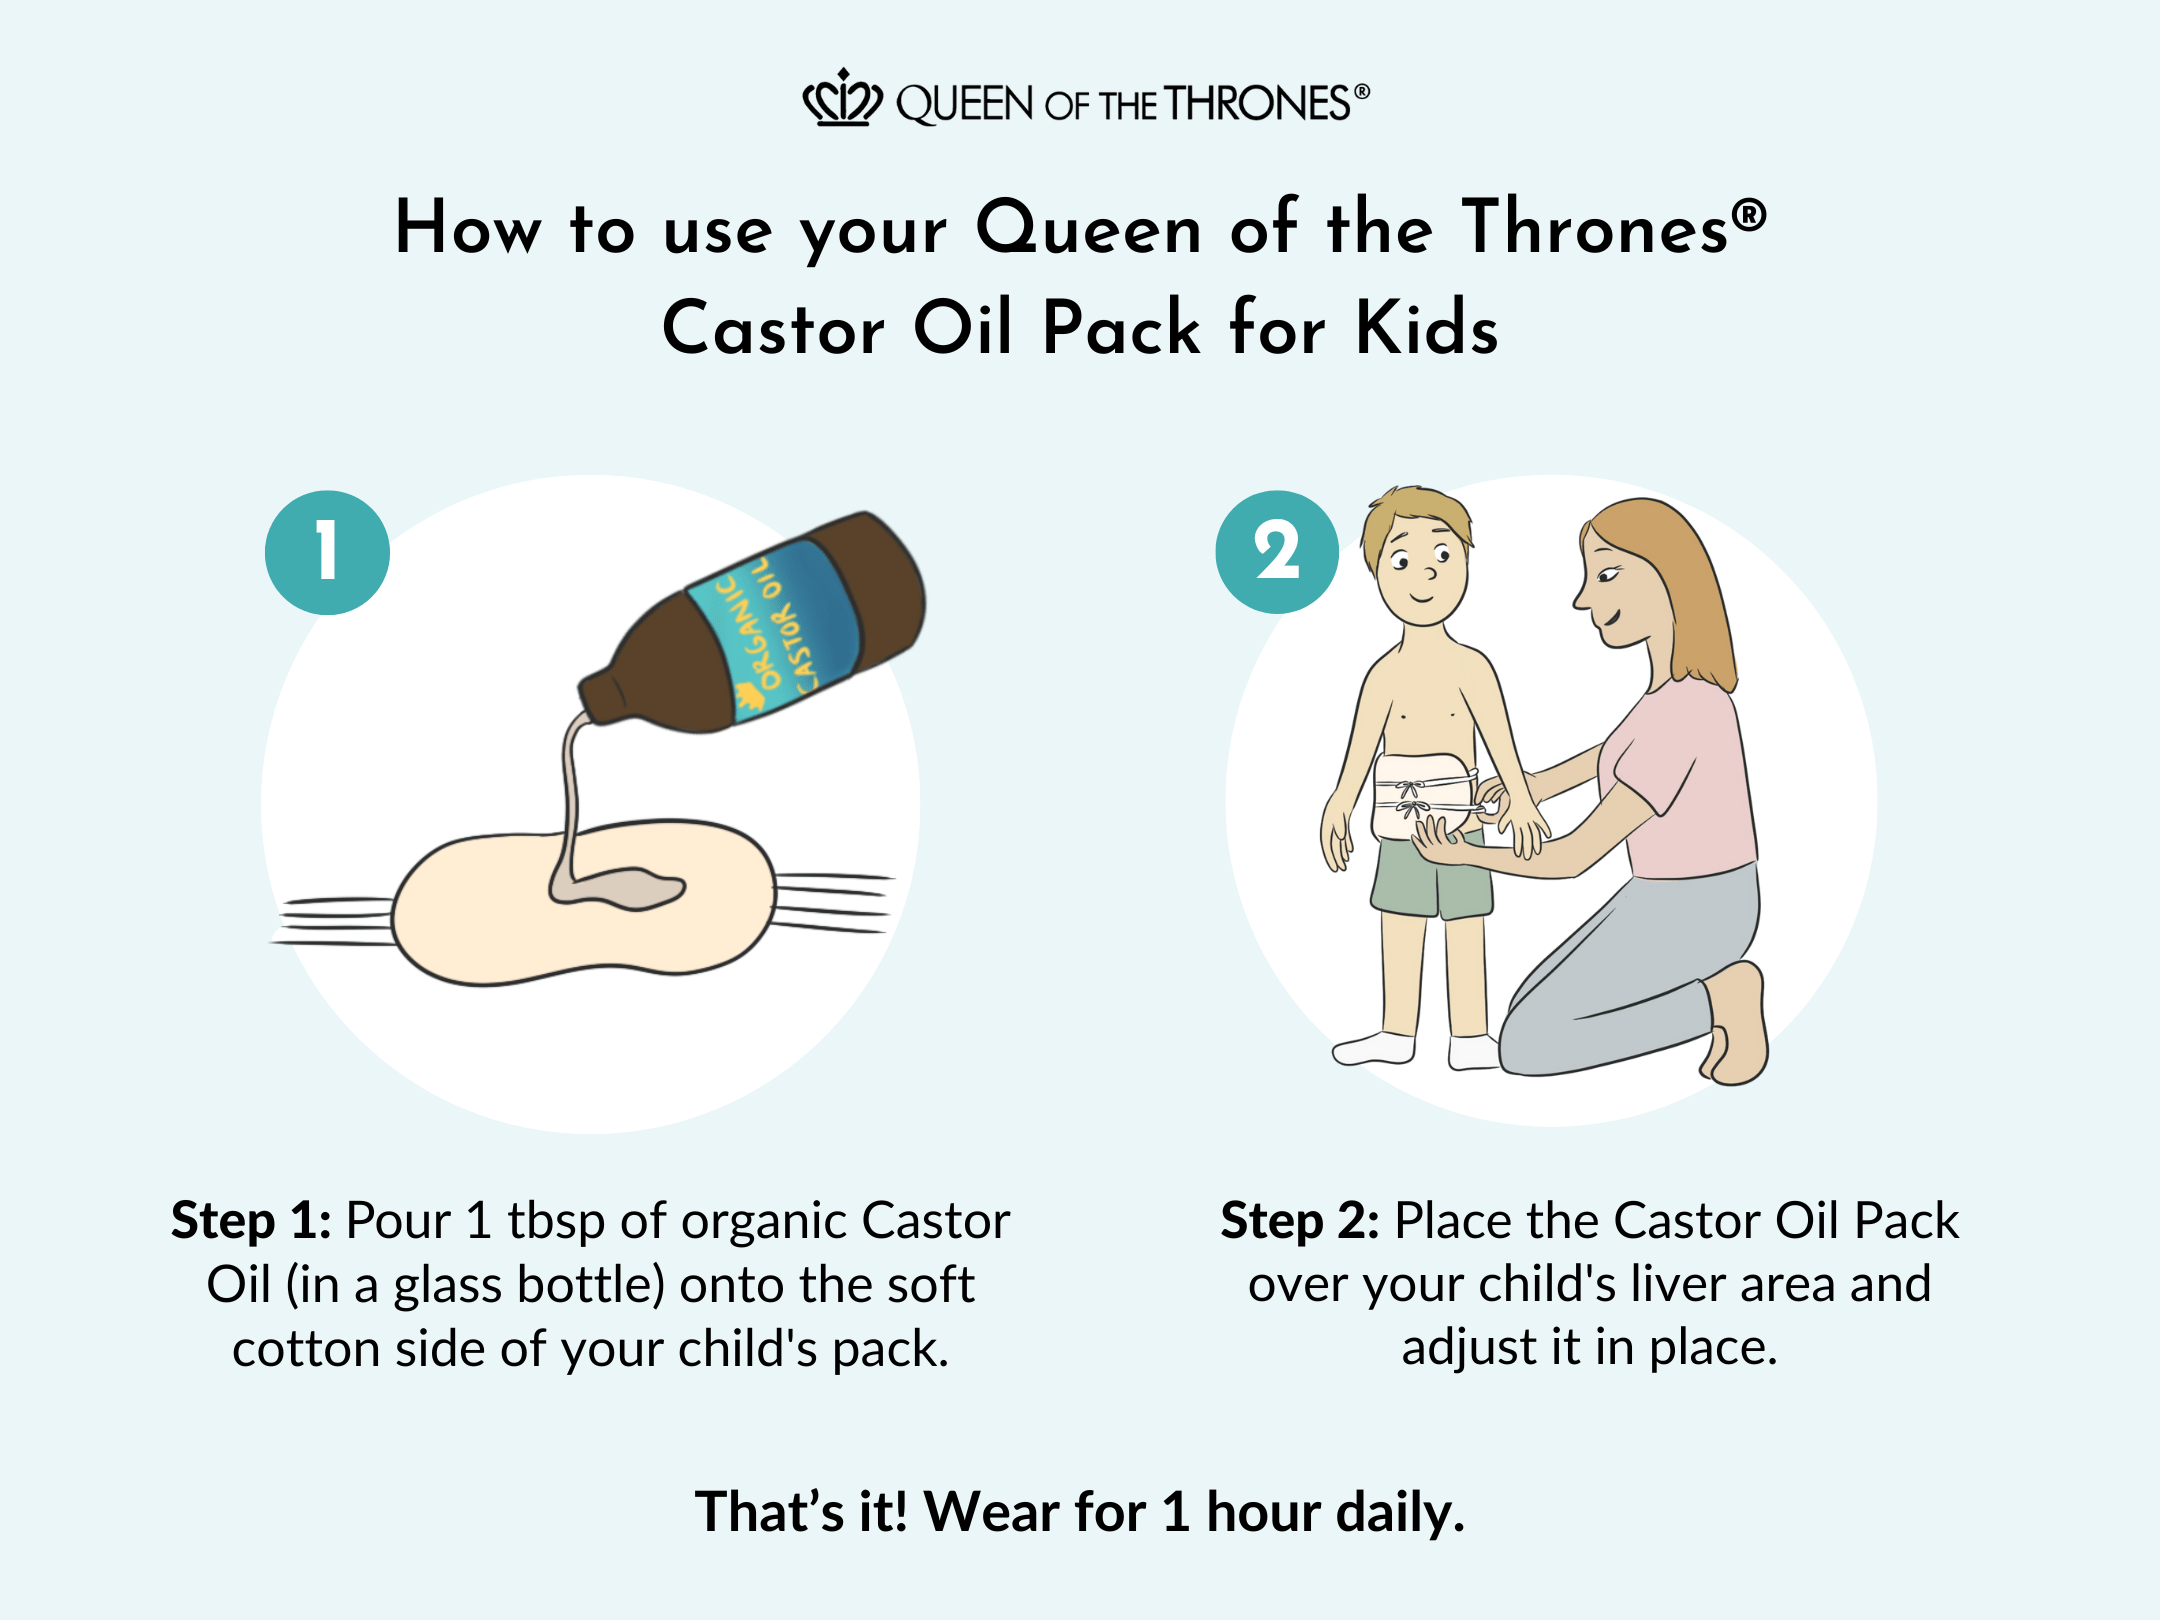 How to use Queen of the Thrones Kids Castor Oil Packs